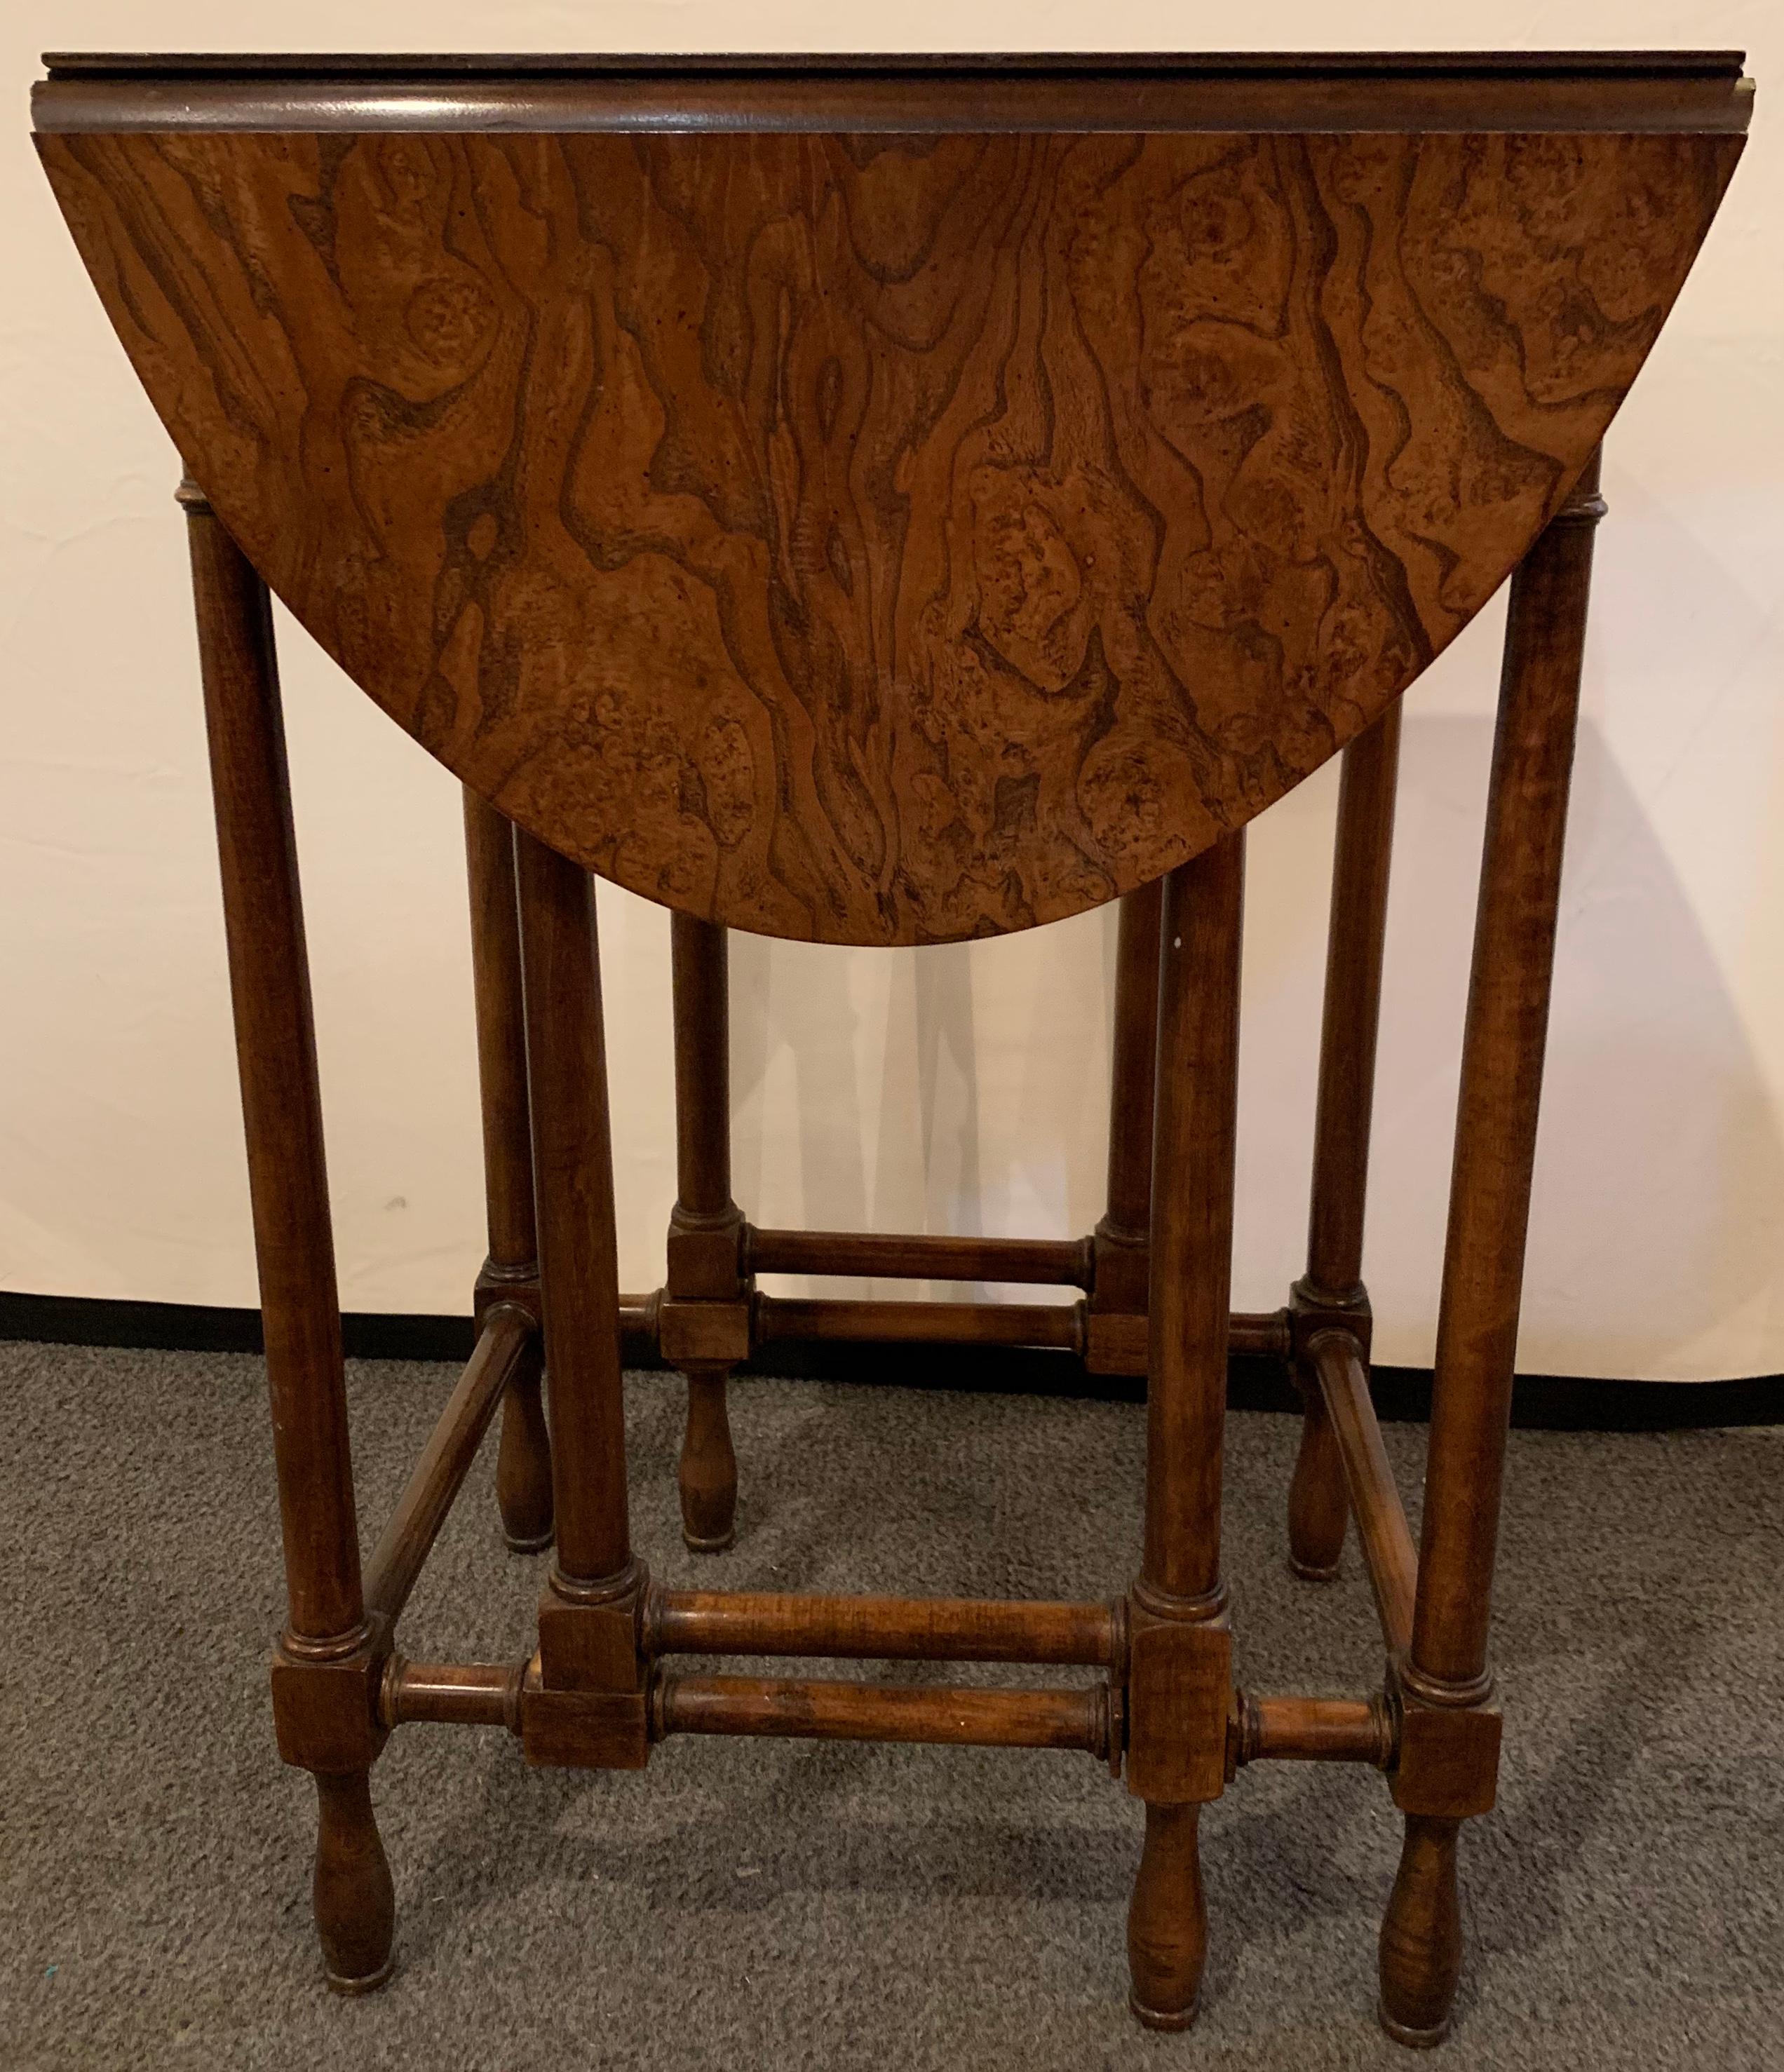 Baker Furniture Company gate leg diminutive end table. A stunning gate leg end or card table in a fine burl wood with flip top sides. This sweet and sleek stylish table opens to sit four for a card game, along side a couch or as a purposeful end